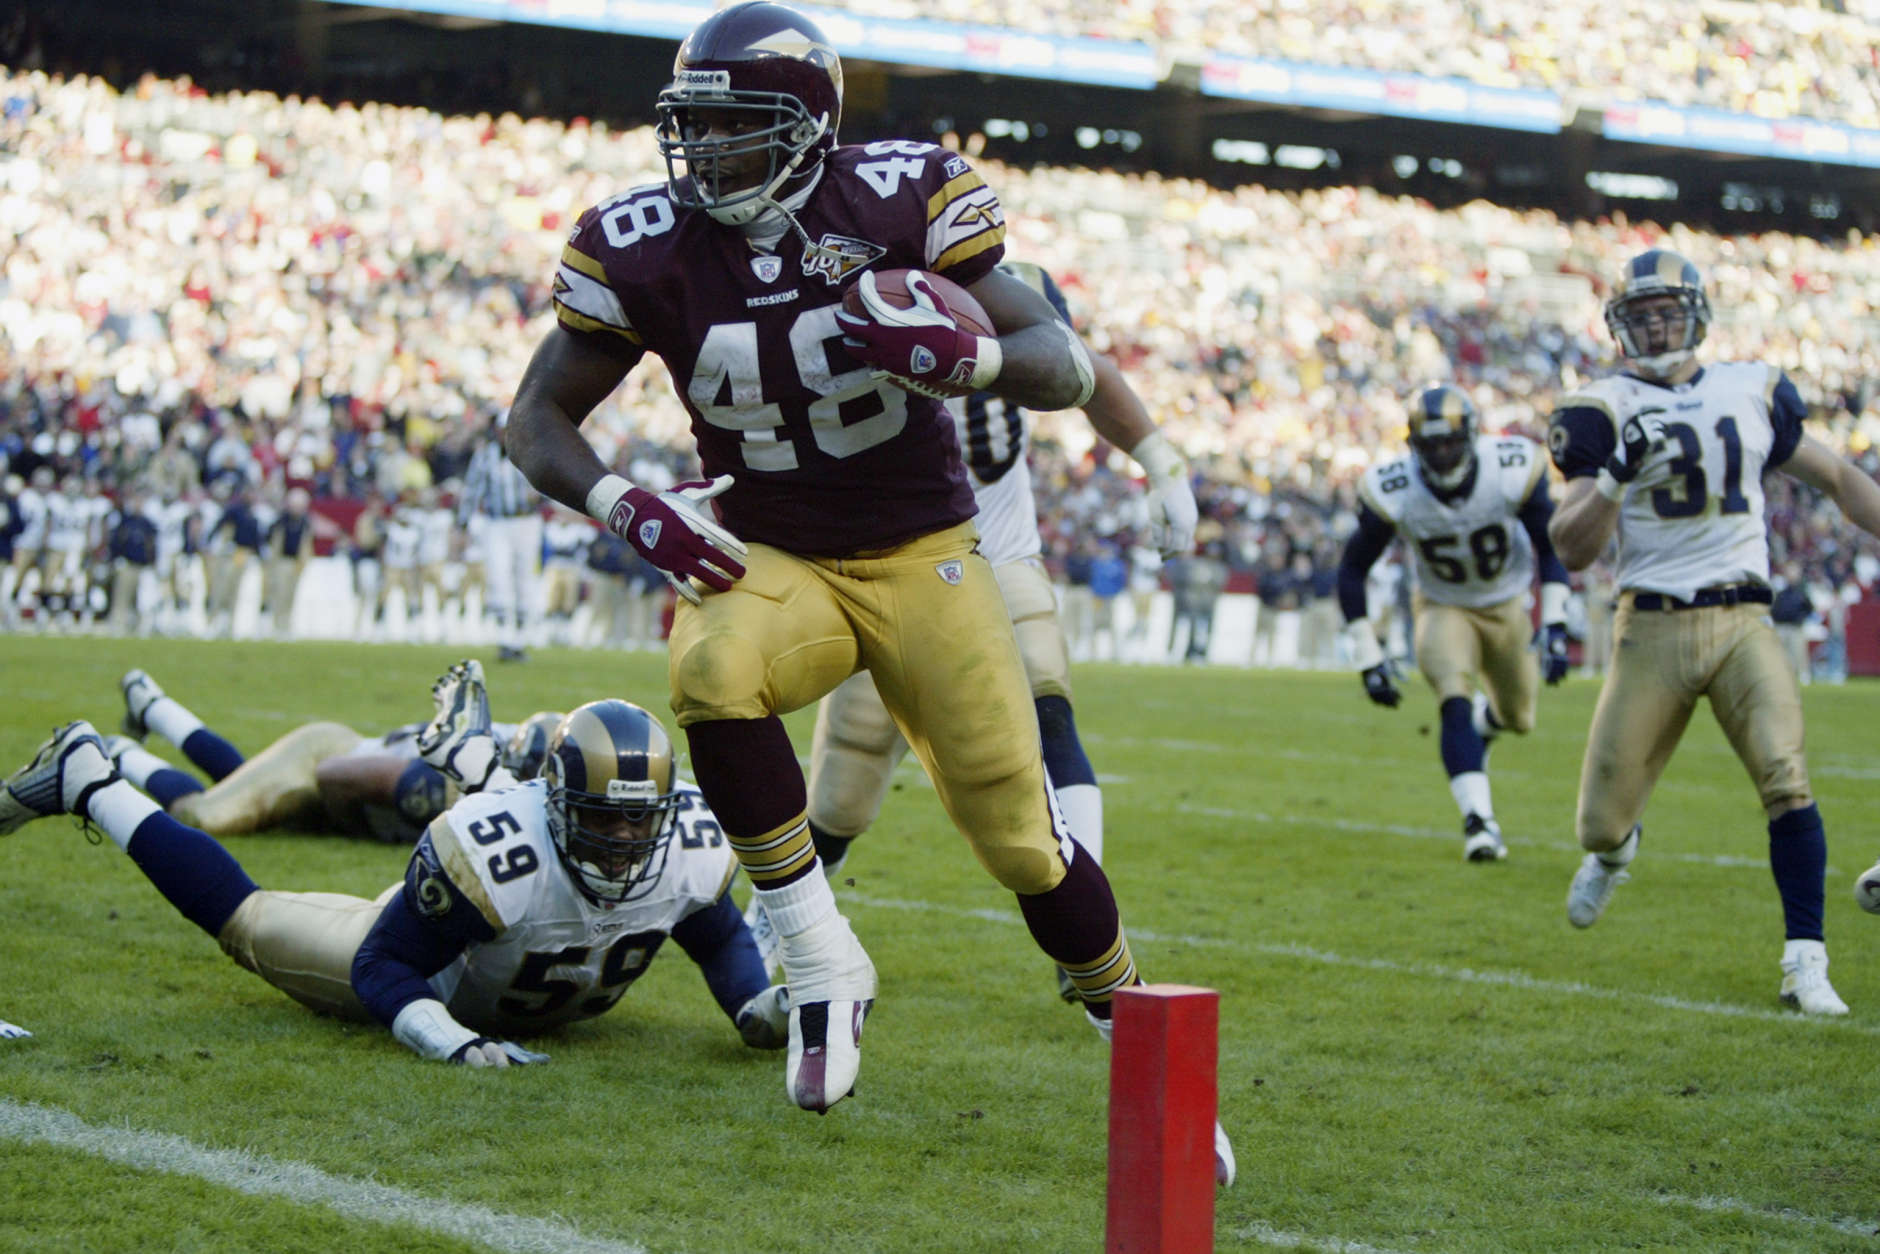 LANDOVER, MD - NOVEMBER 24:  Stephen Davis #48 of the Washington Redskins runs for a touchdown against the St. Louis Rams on November 24, 2002 at FedEx Field in Landover Maryland.  Davis had touchdown runs of one, three and five yards on the day as the Redskins defeated the Rams 20-17.  (Photo by Al Bello/Getty Images)